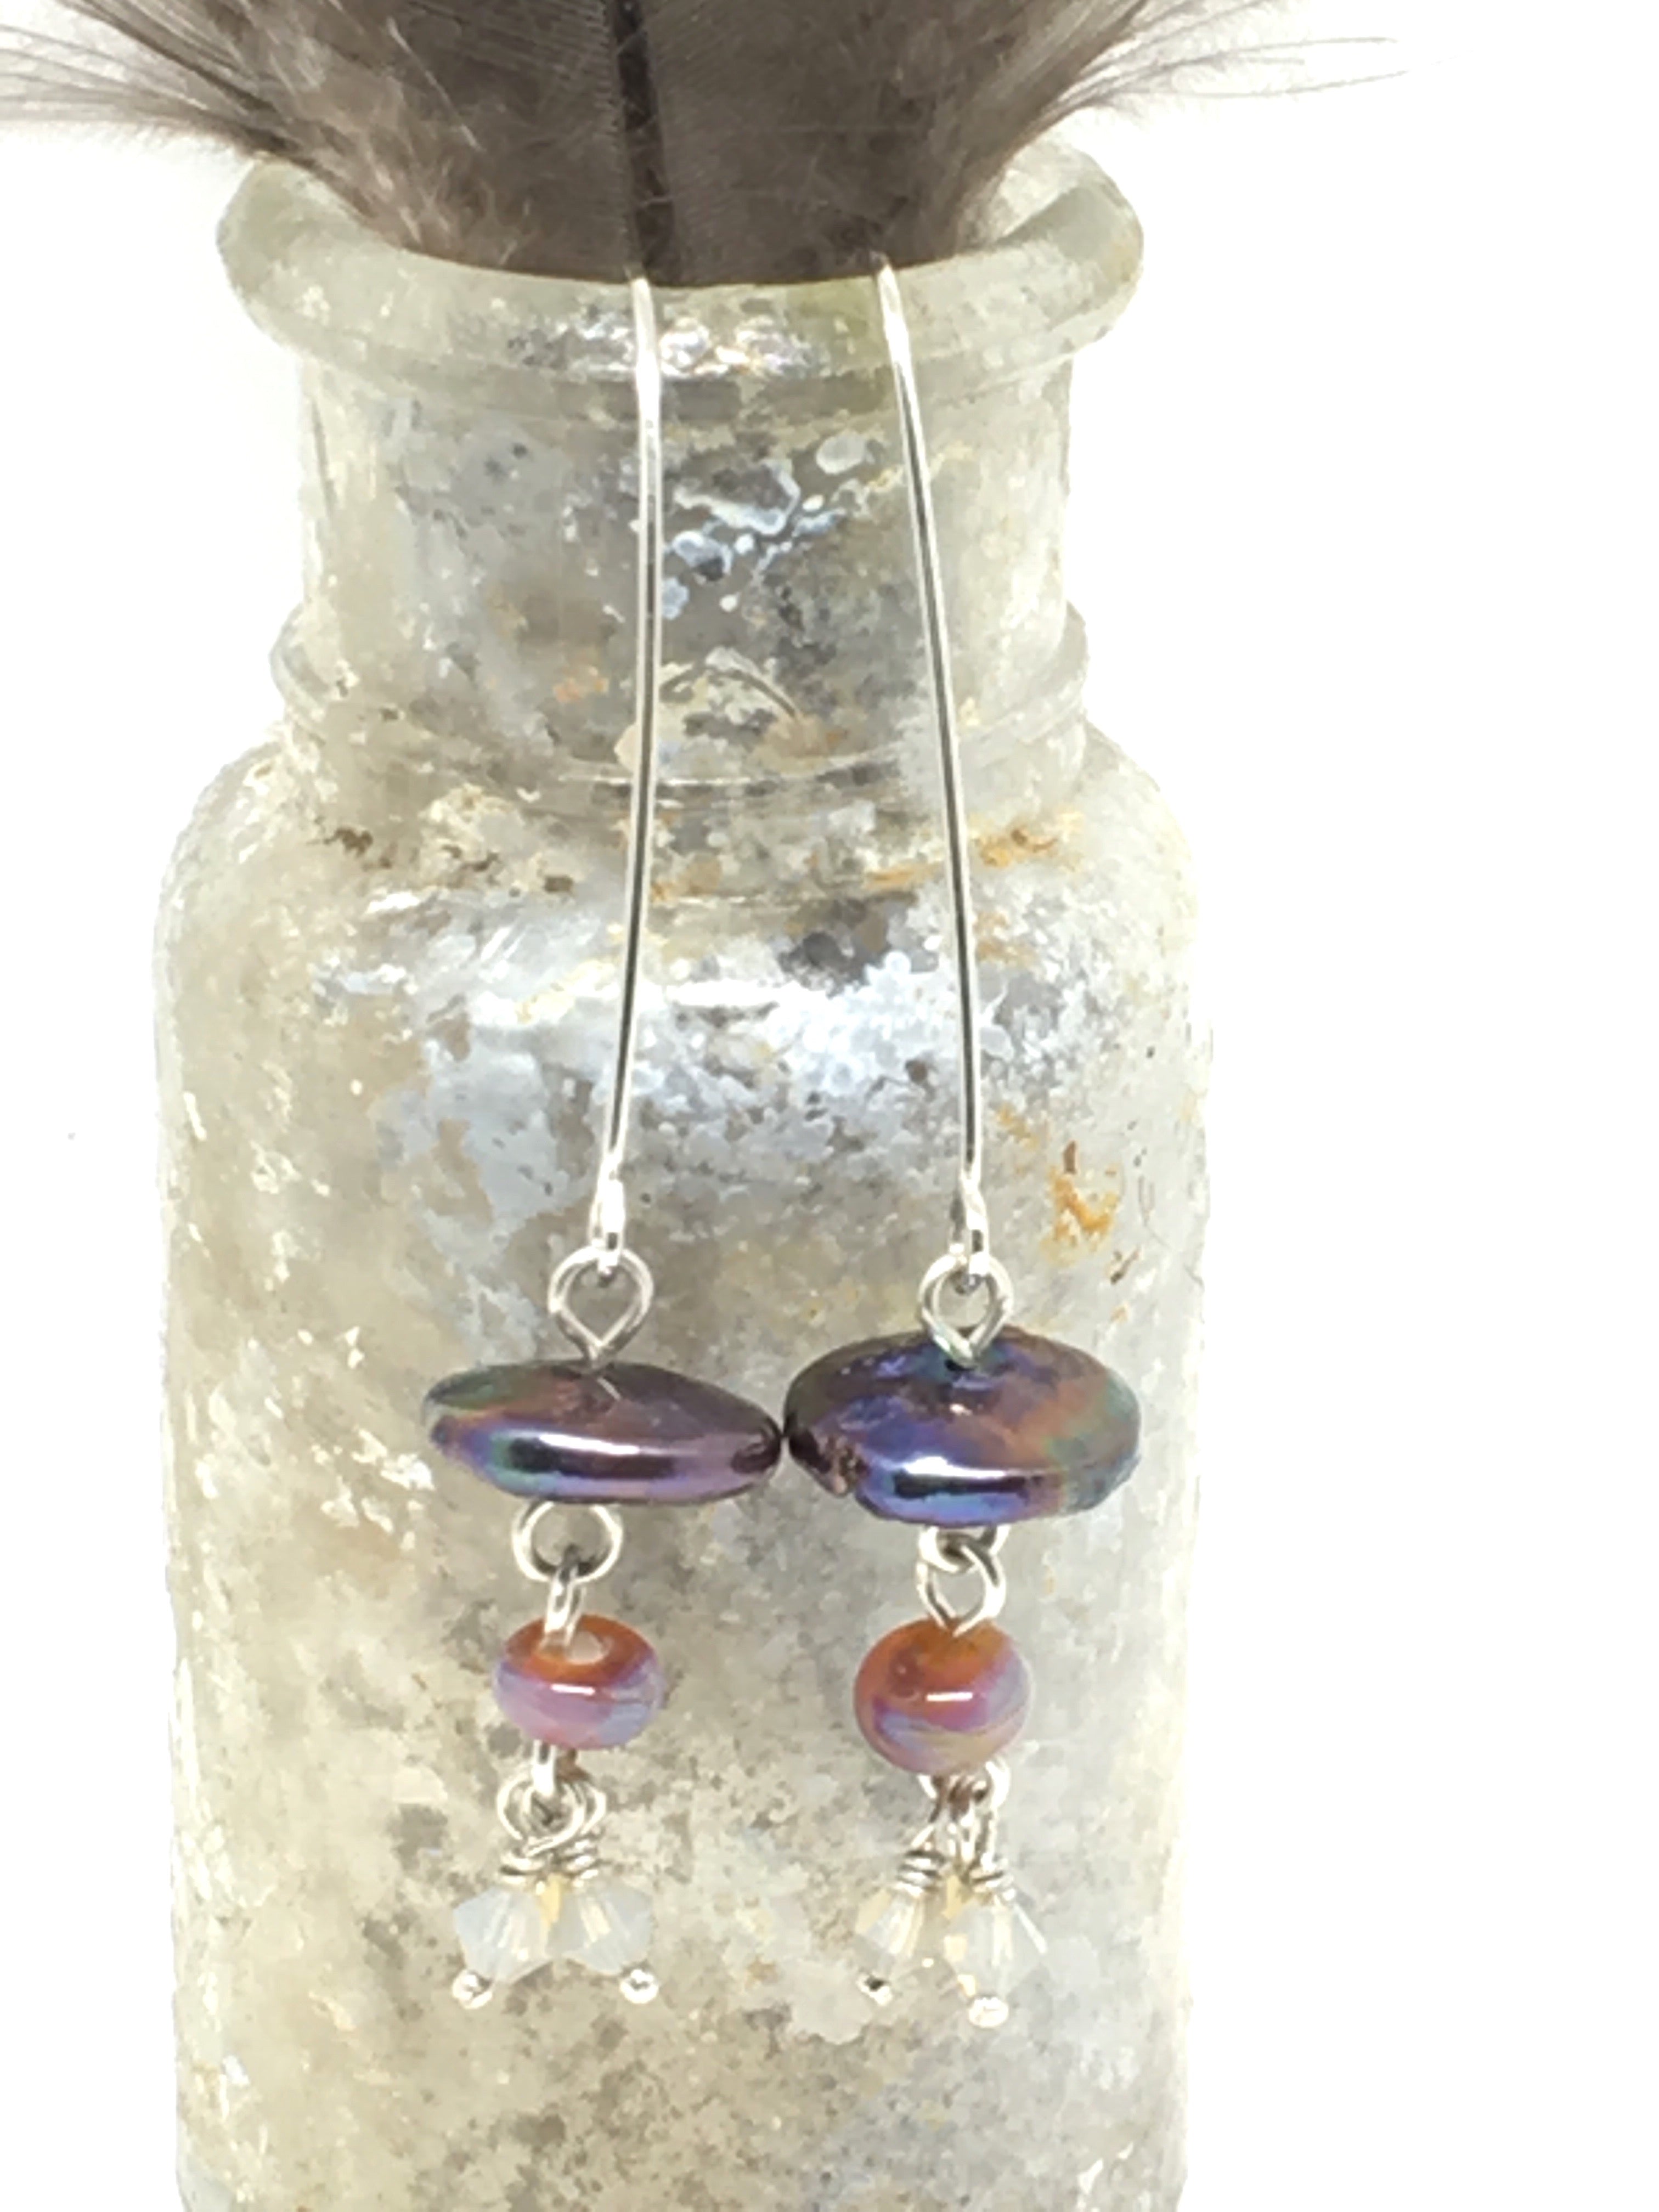 Sterling Silver drop earrings with pearls, Swarovski, and artisan glass